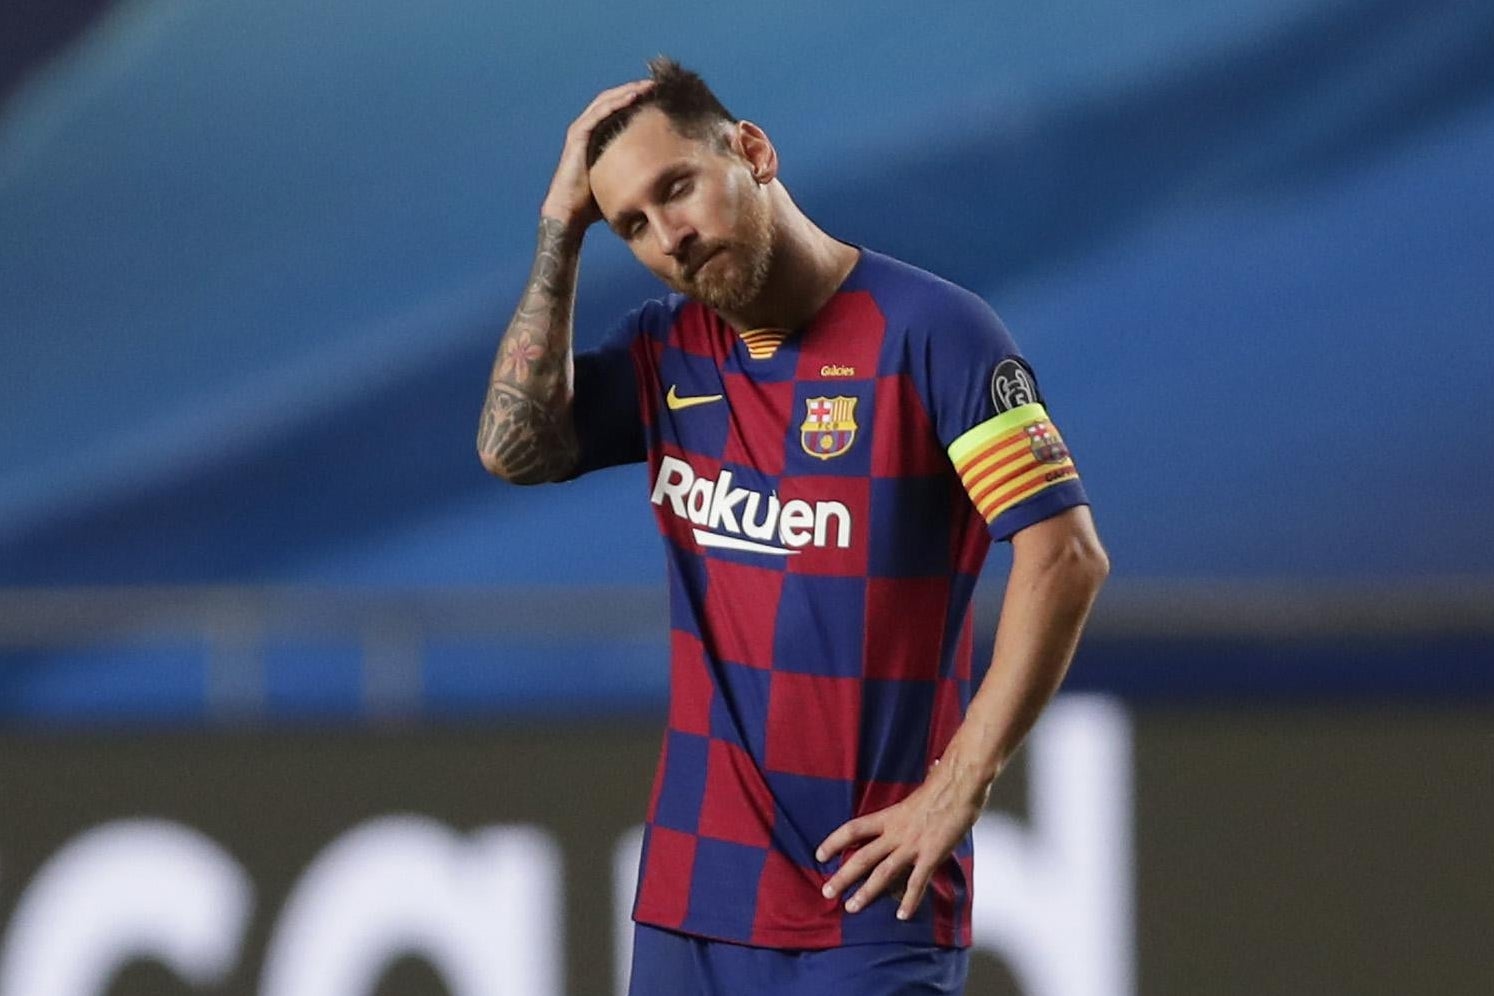 Messi closes his eyes and holds his hand to his forehead on the pitch for Barcelona